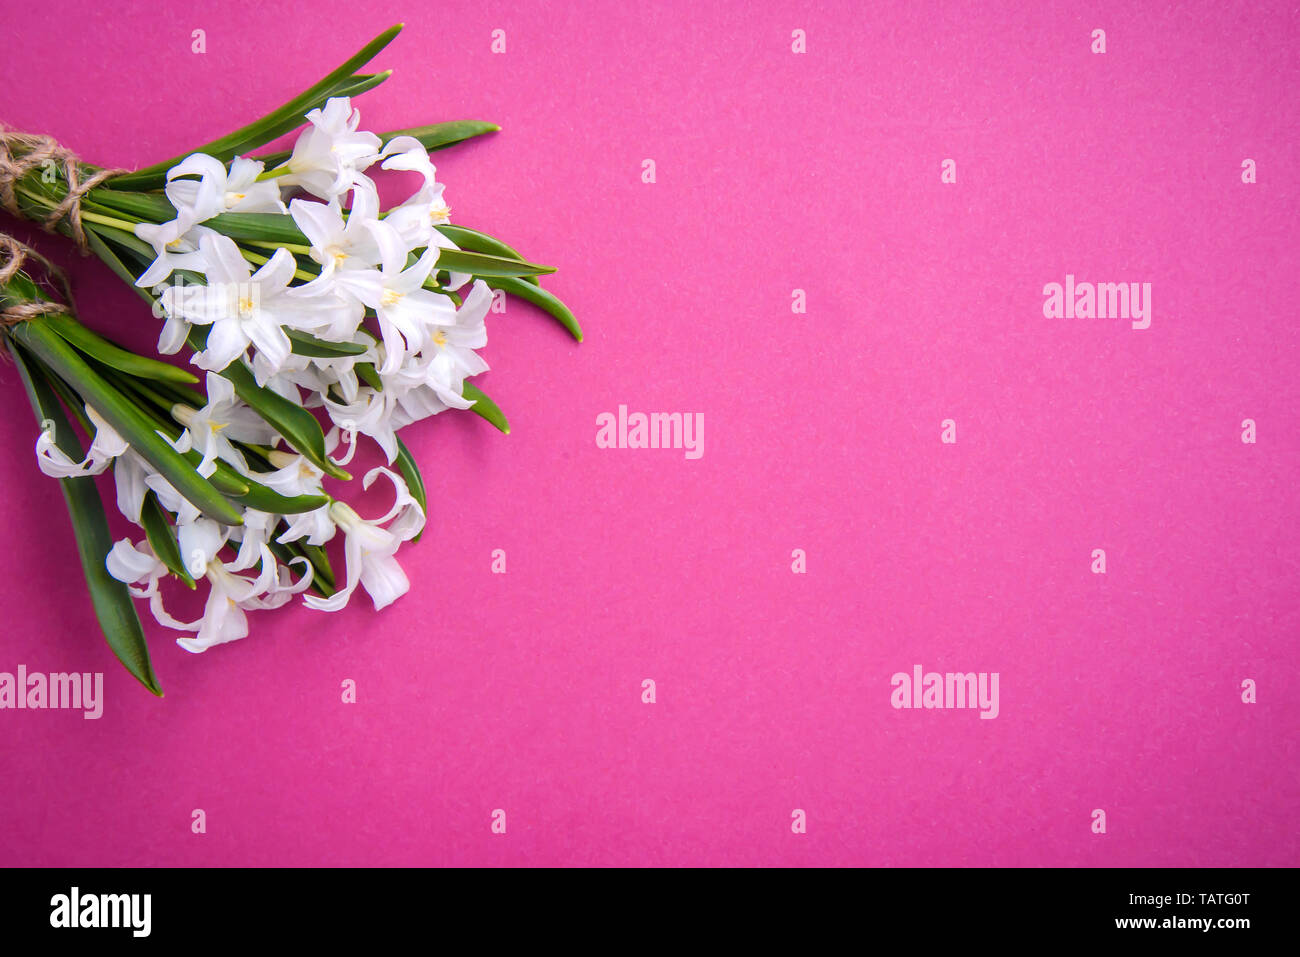 Bouquet of small white spring flowers Chionodoxa on pink background with copy space Stock Photo